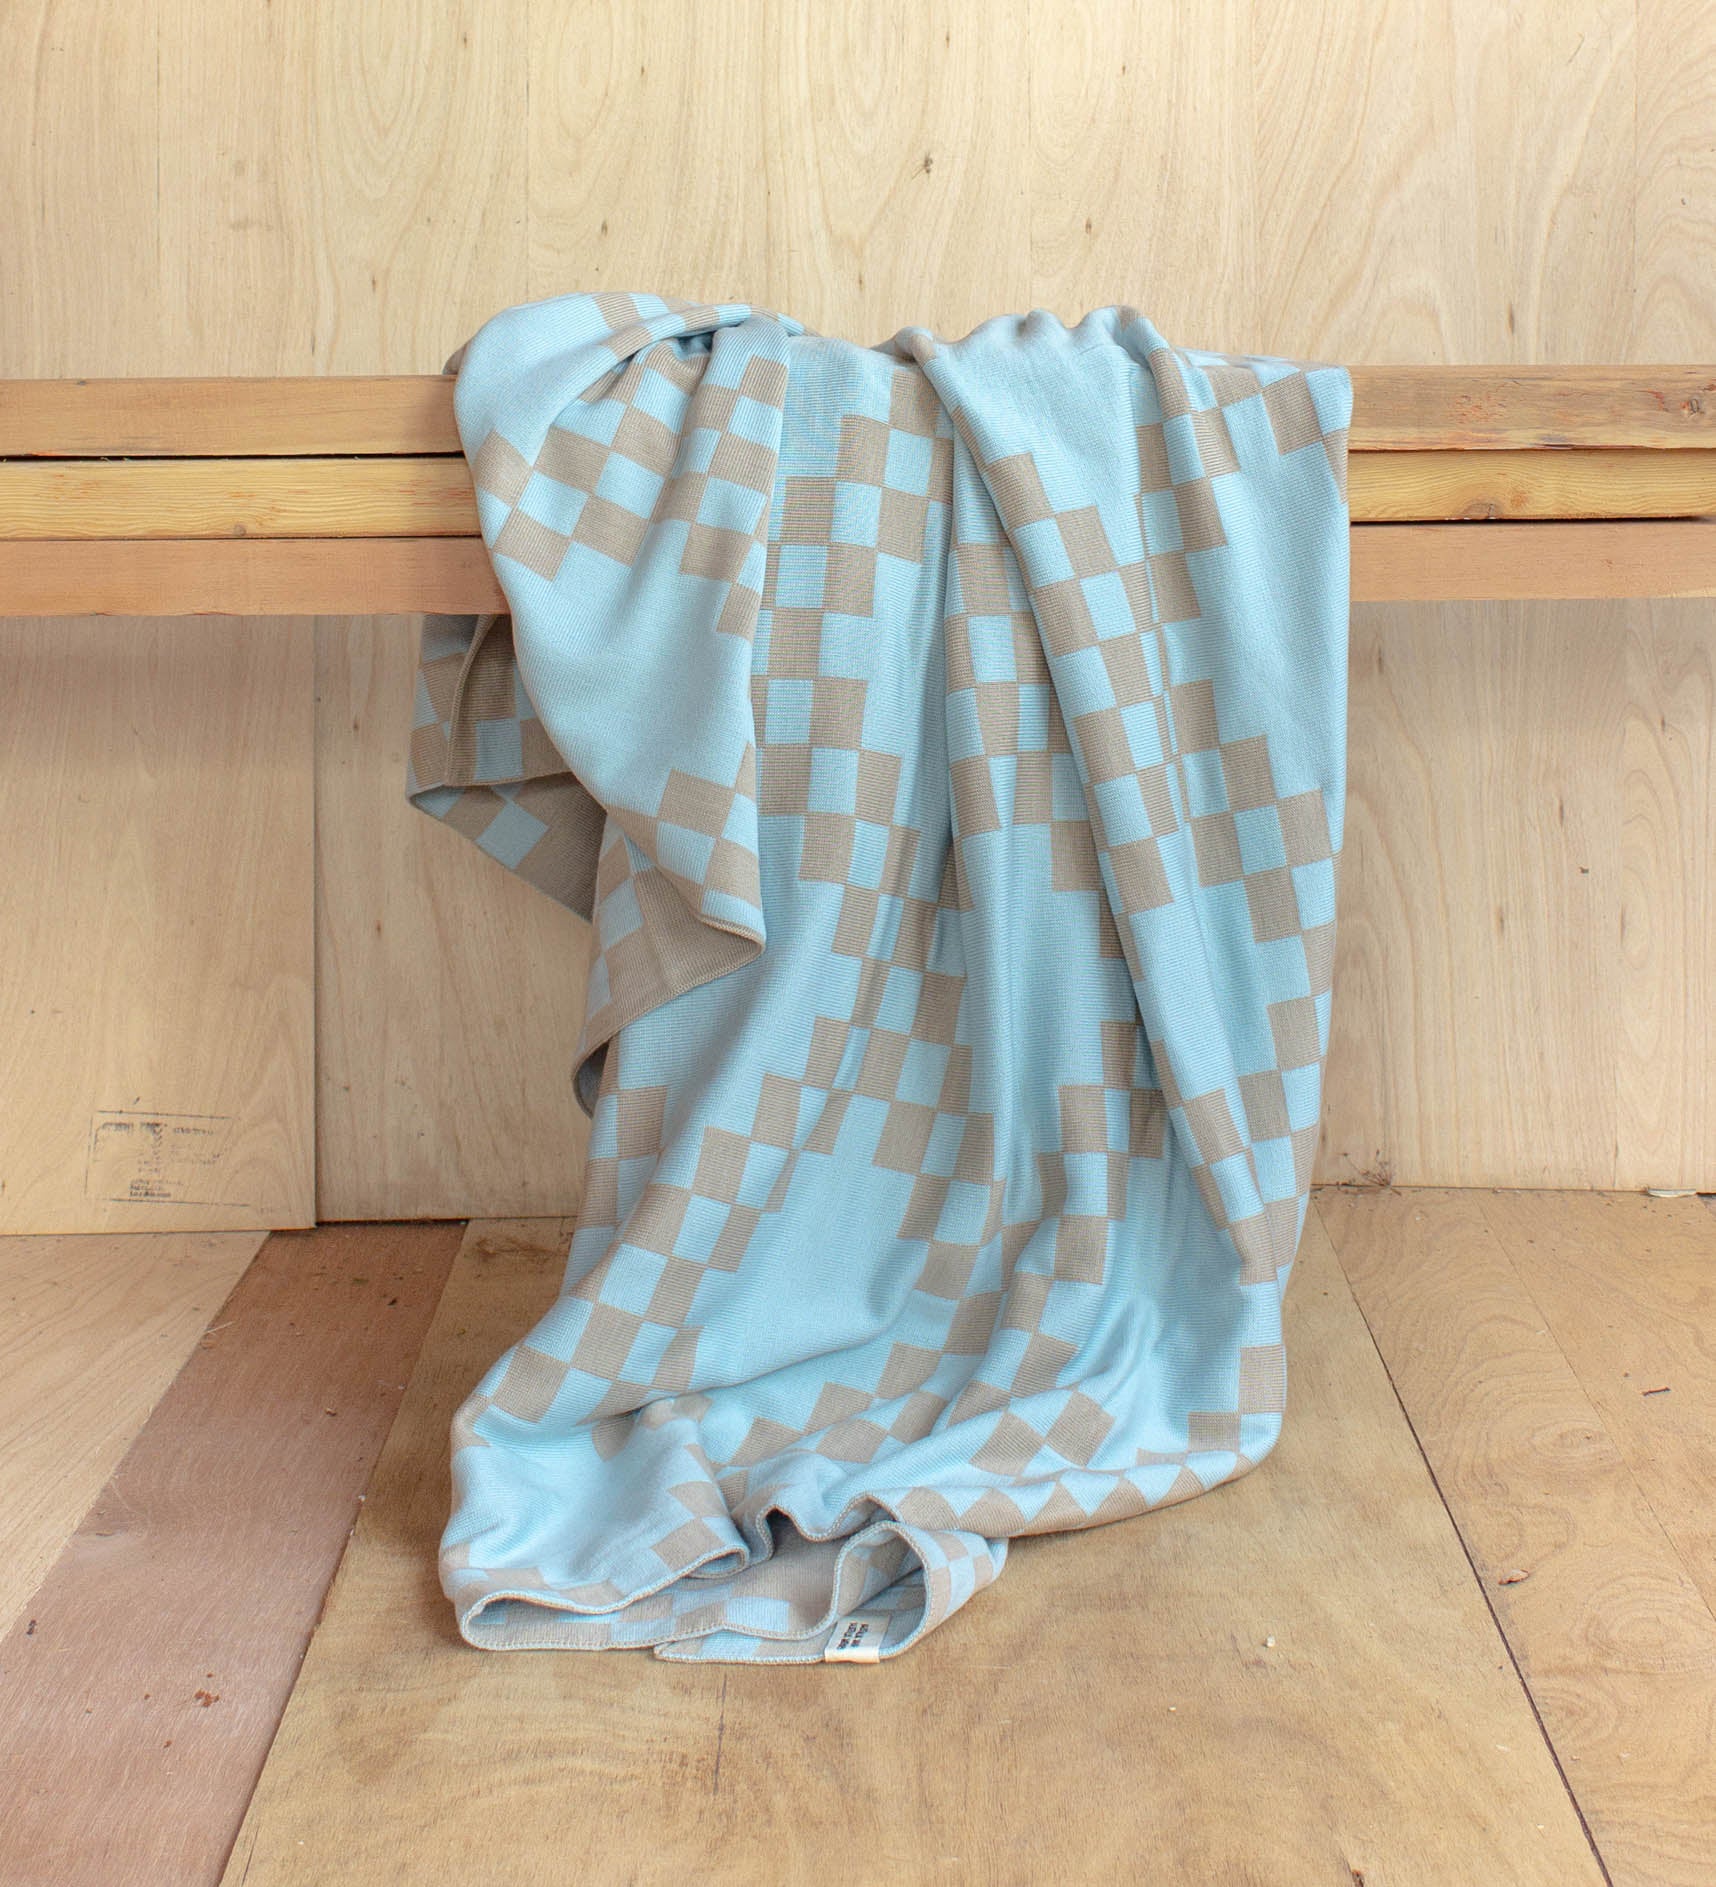 SKY CHAINS Merino Wool Blanket - Light Blue and Mushroom - Available in Baby, Queen, and King Sizes